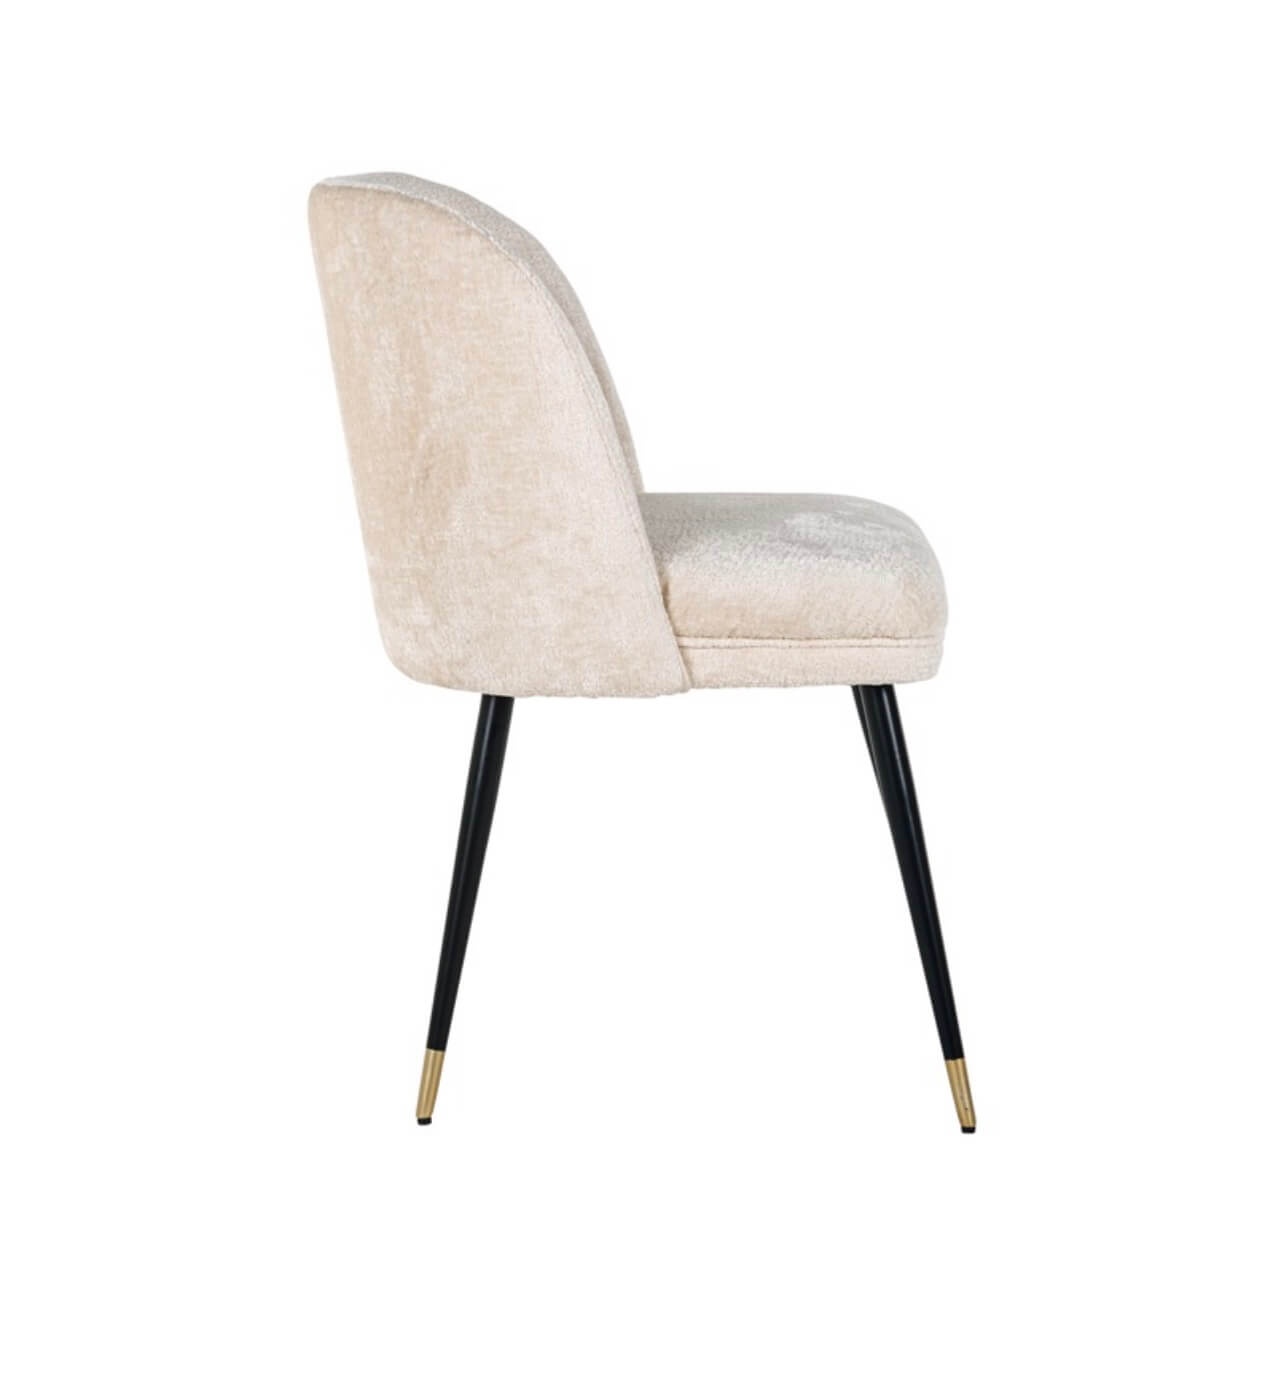 White Chenille Dining Chair